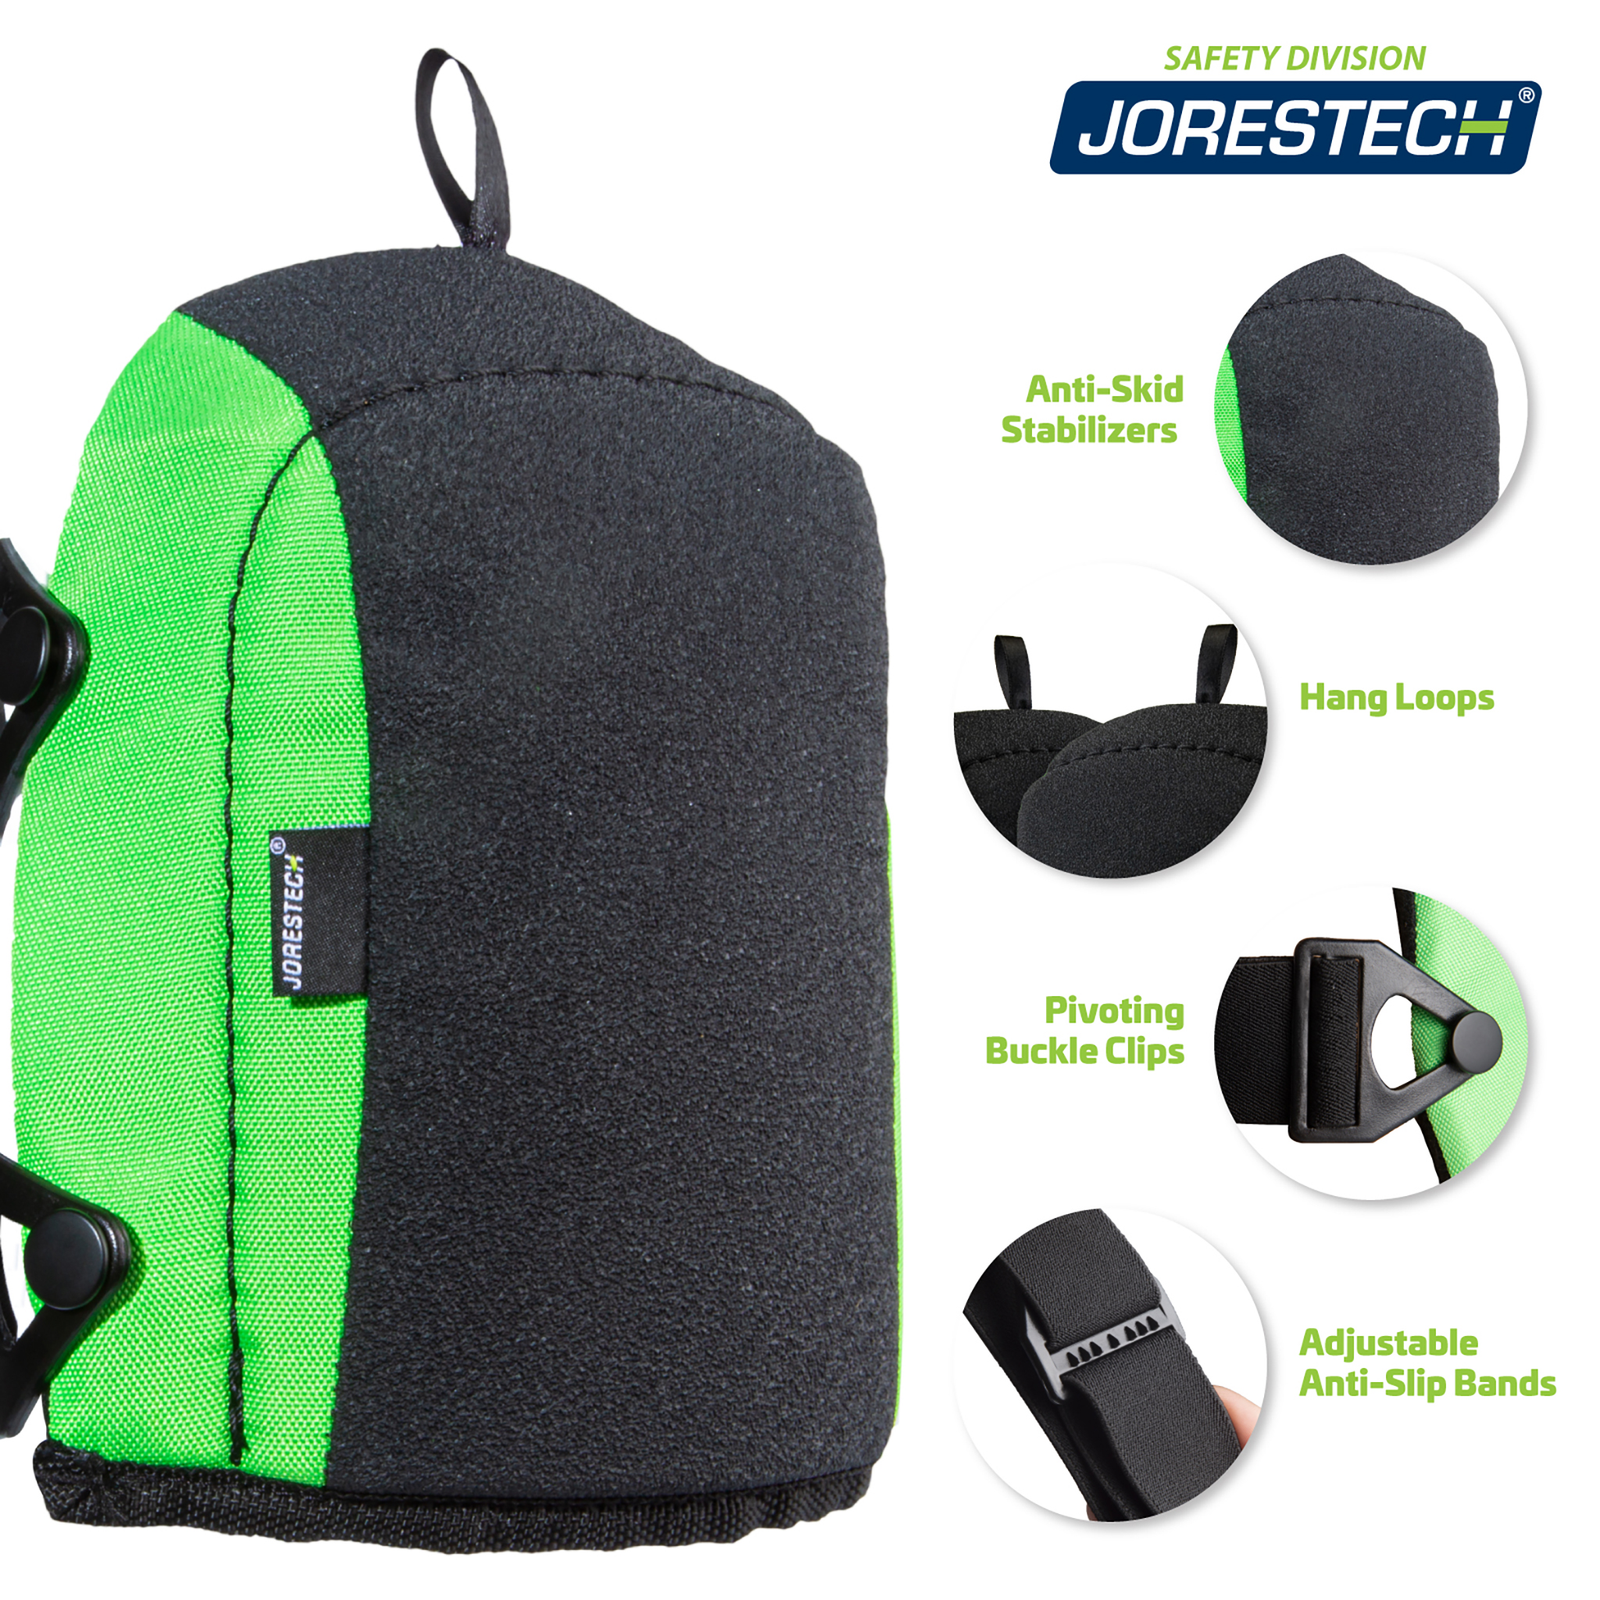 Infographic showing one JORESTECH knee pad and several call outs that read: anti-skid stabilizers, hang loops, pivoting buckle clips, adjustable anti-slip bands. Image of the anti skid foam knee pads with adjustable straps and features